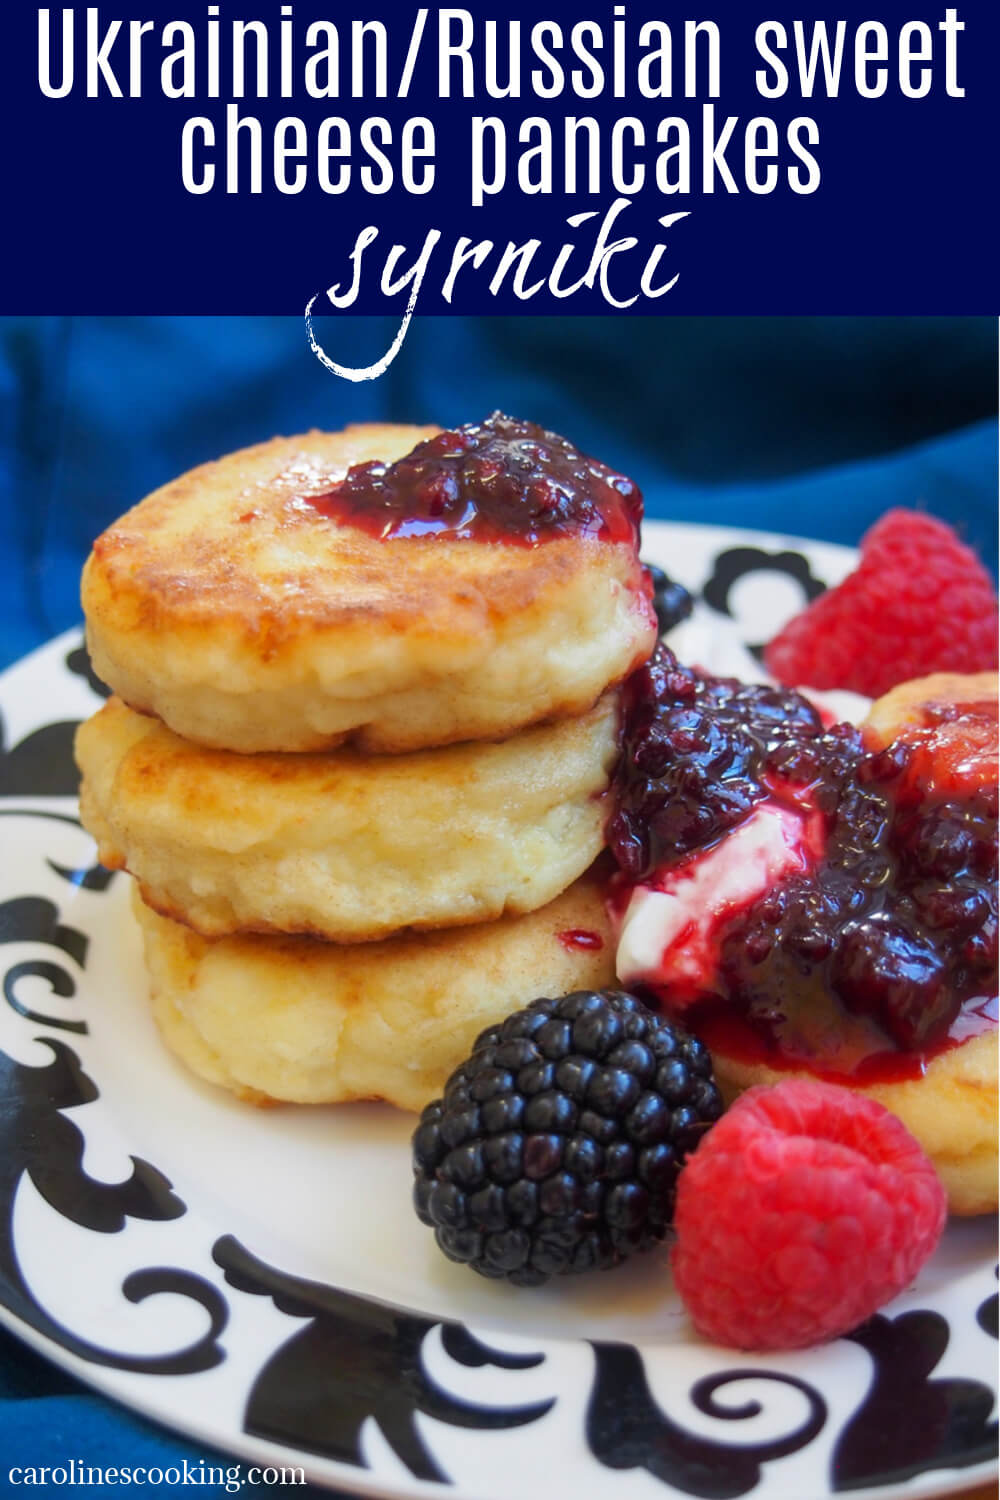 Syrniki are small, thick Ukrainian/Russian sweet cheese pancakes.  They might not have a lot of ingredients and look a bit unassuming, but these little bites are soft, fluffy and deliciously good. 